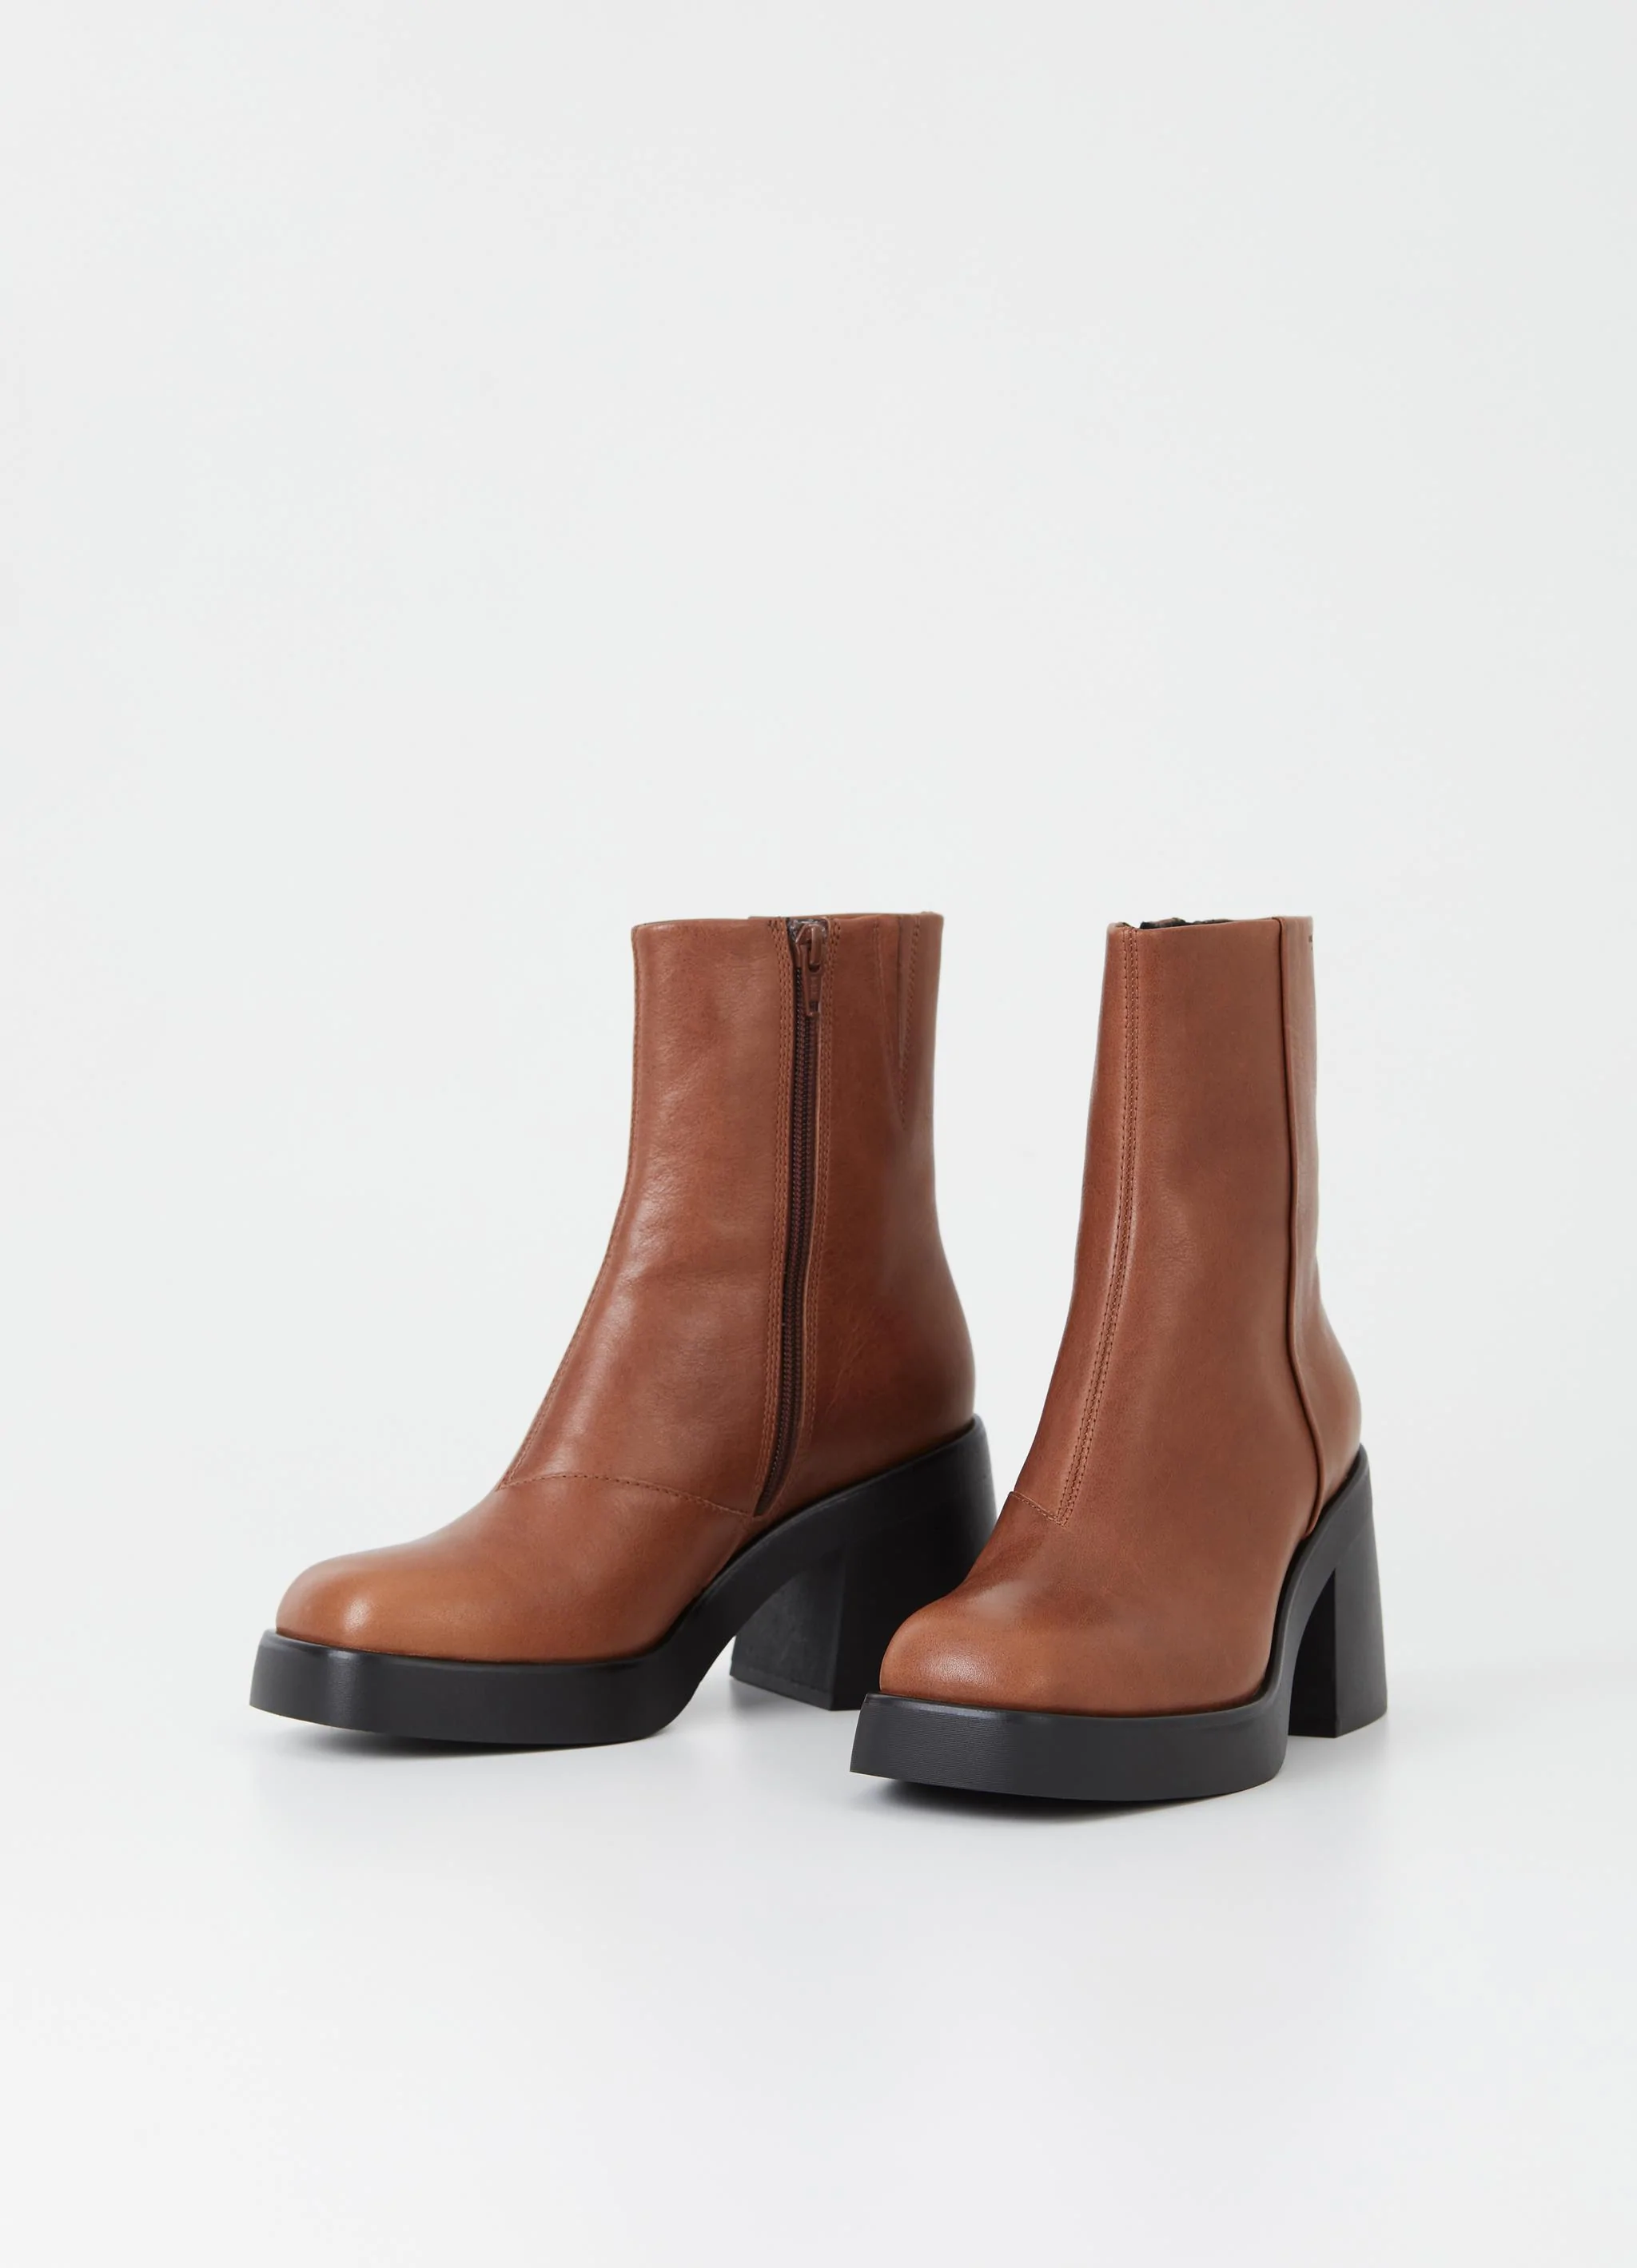 Product Image for Brooke Boot, Cognac